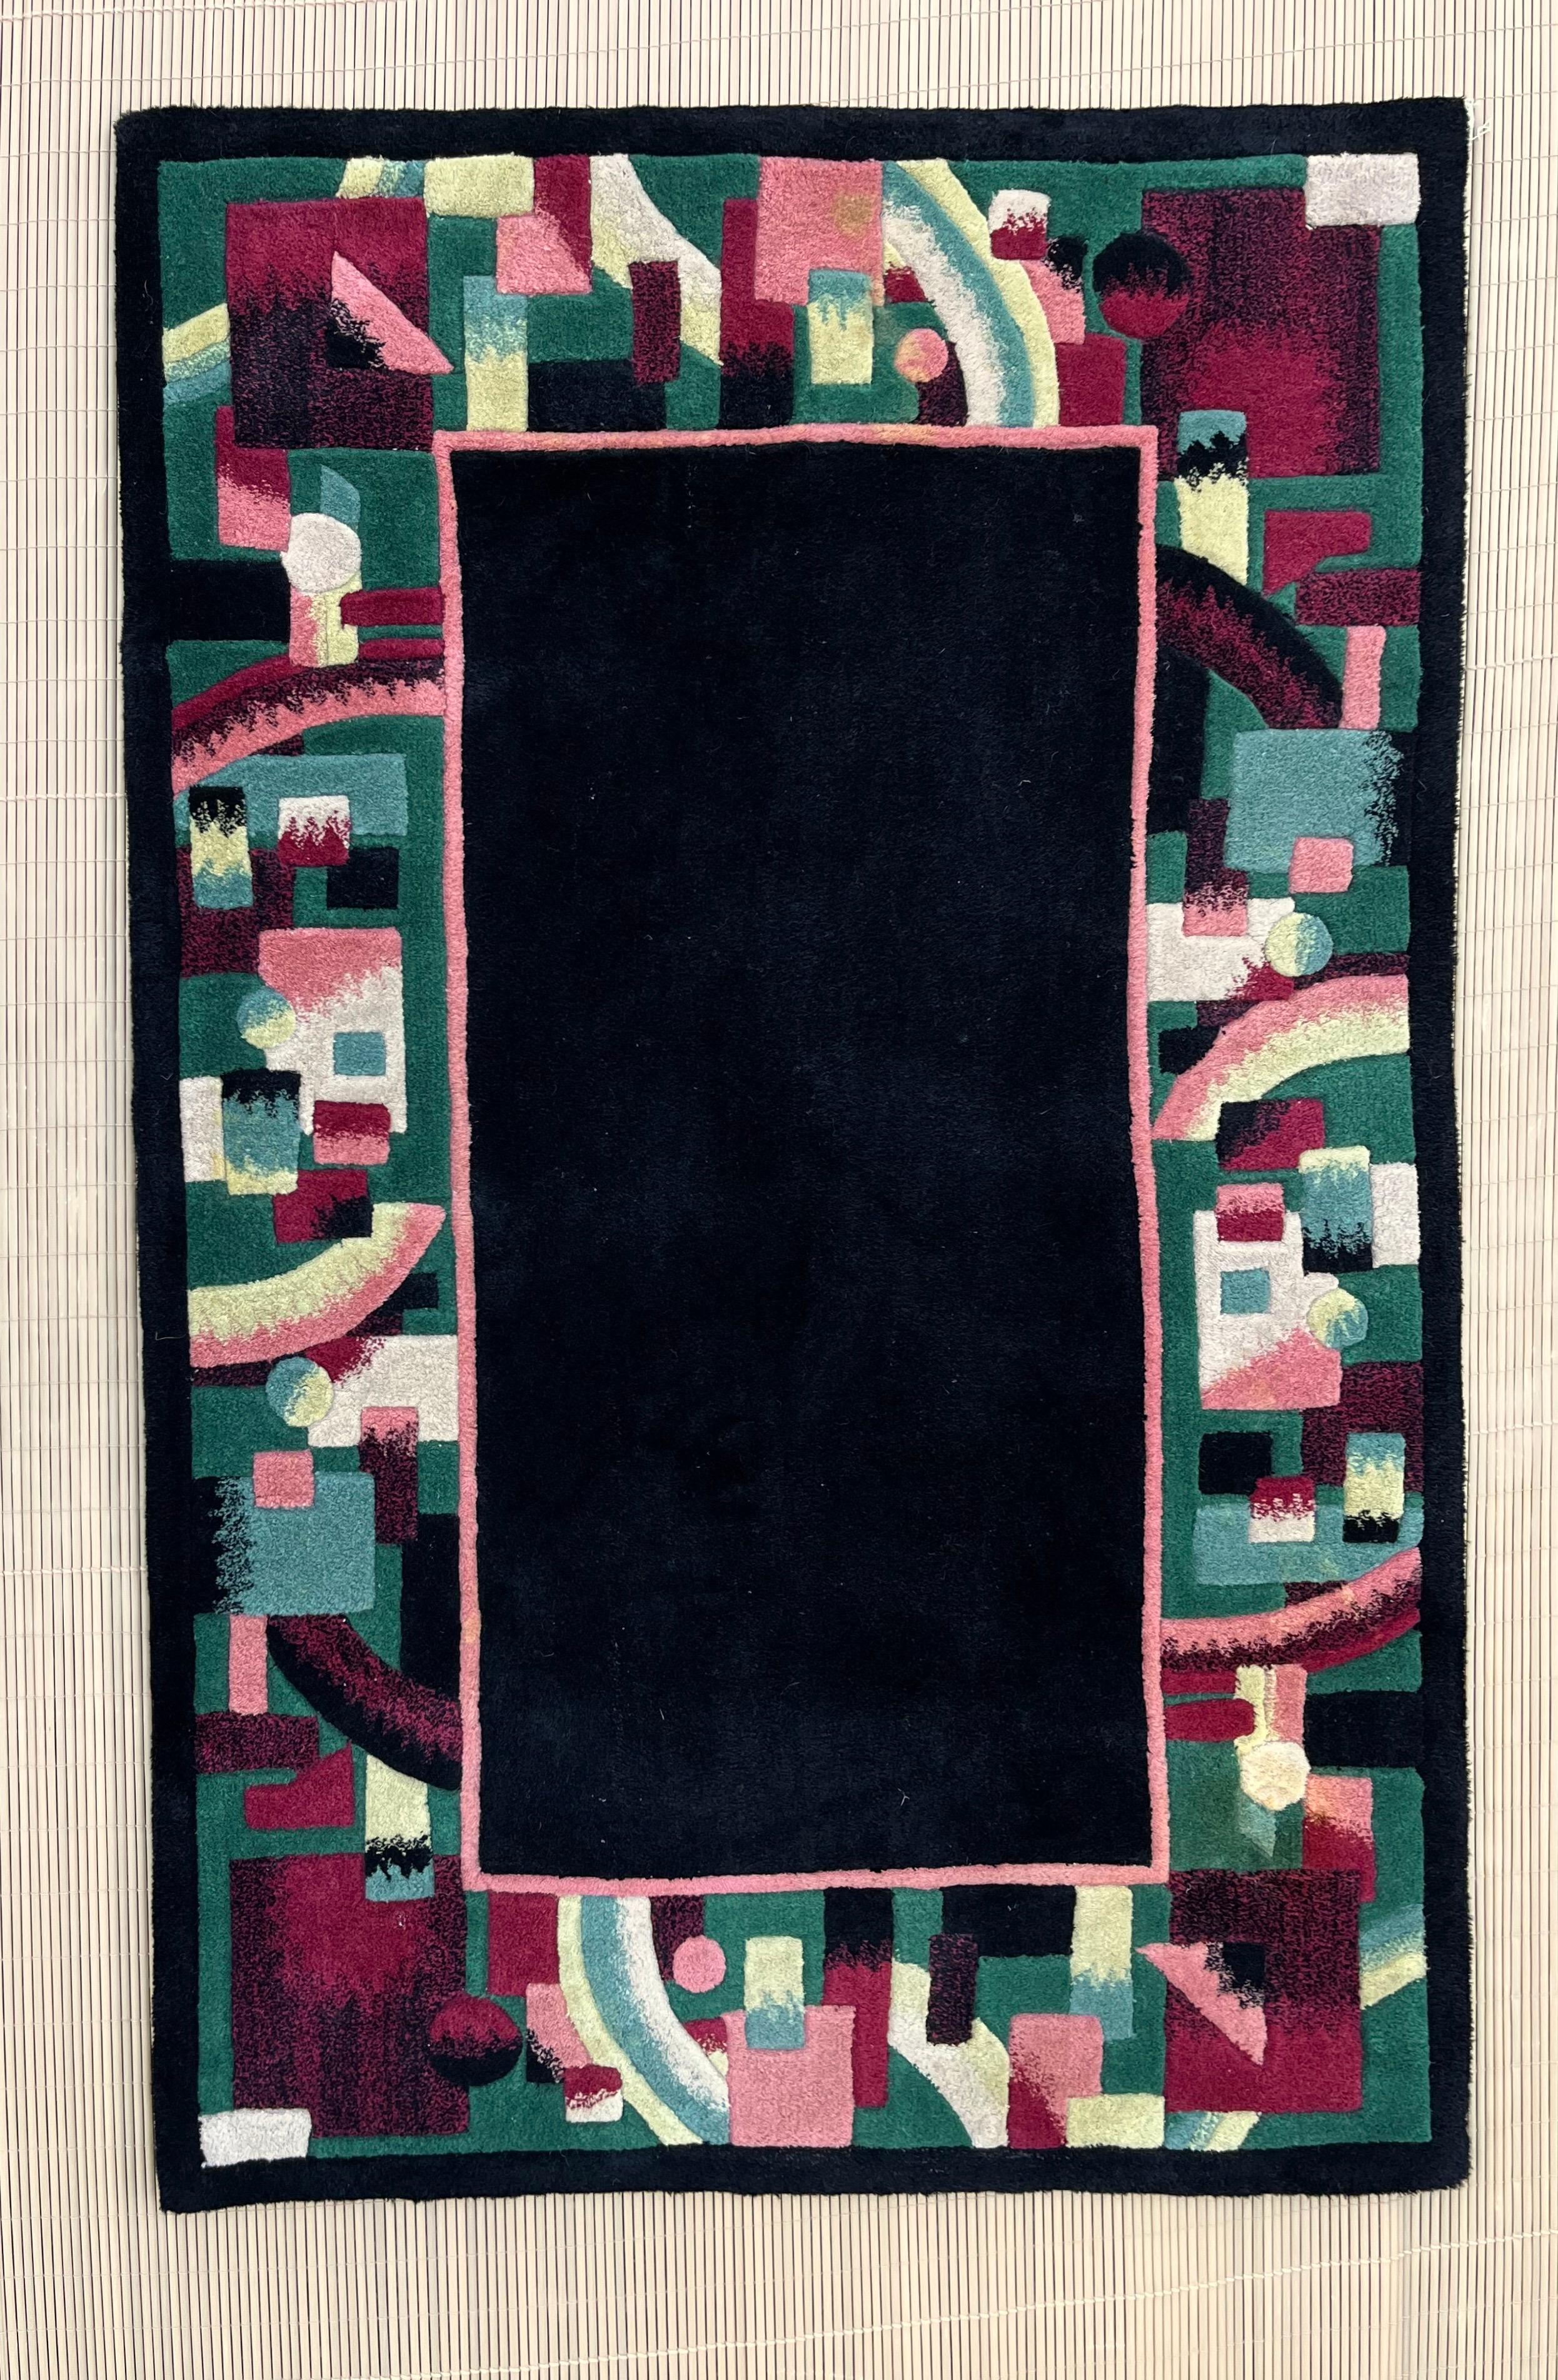 Vintage Postmodern Geometric Area Rug. circa 1980s
Features an abstract design on tufted wool in dark tones of greens, magenta, and cream around a black center.
In excellent original condition with minor marks from previous use. Please See close